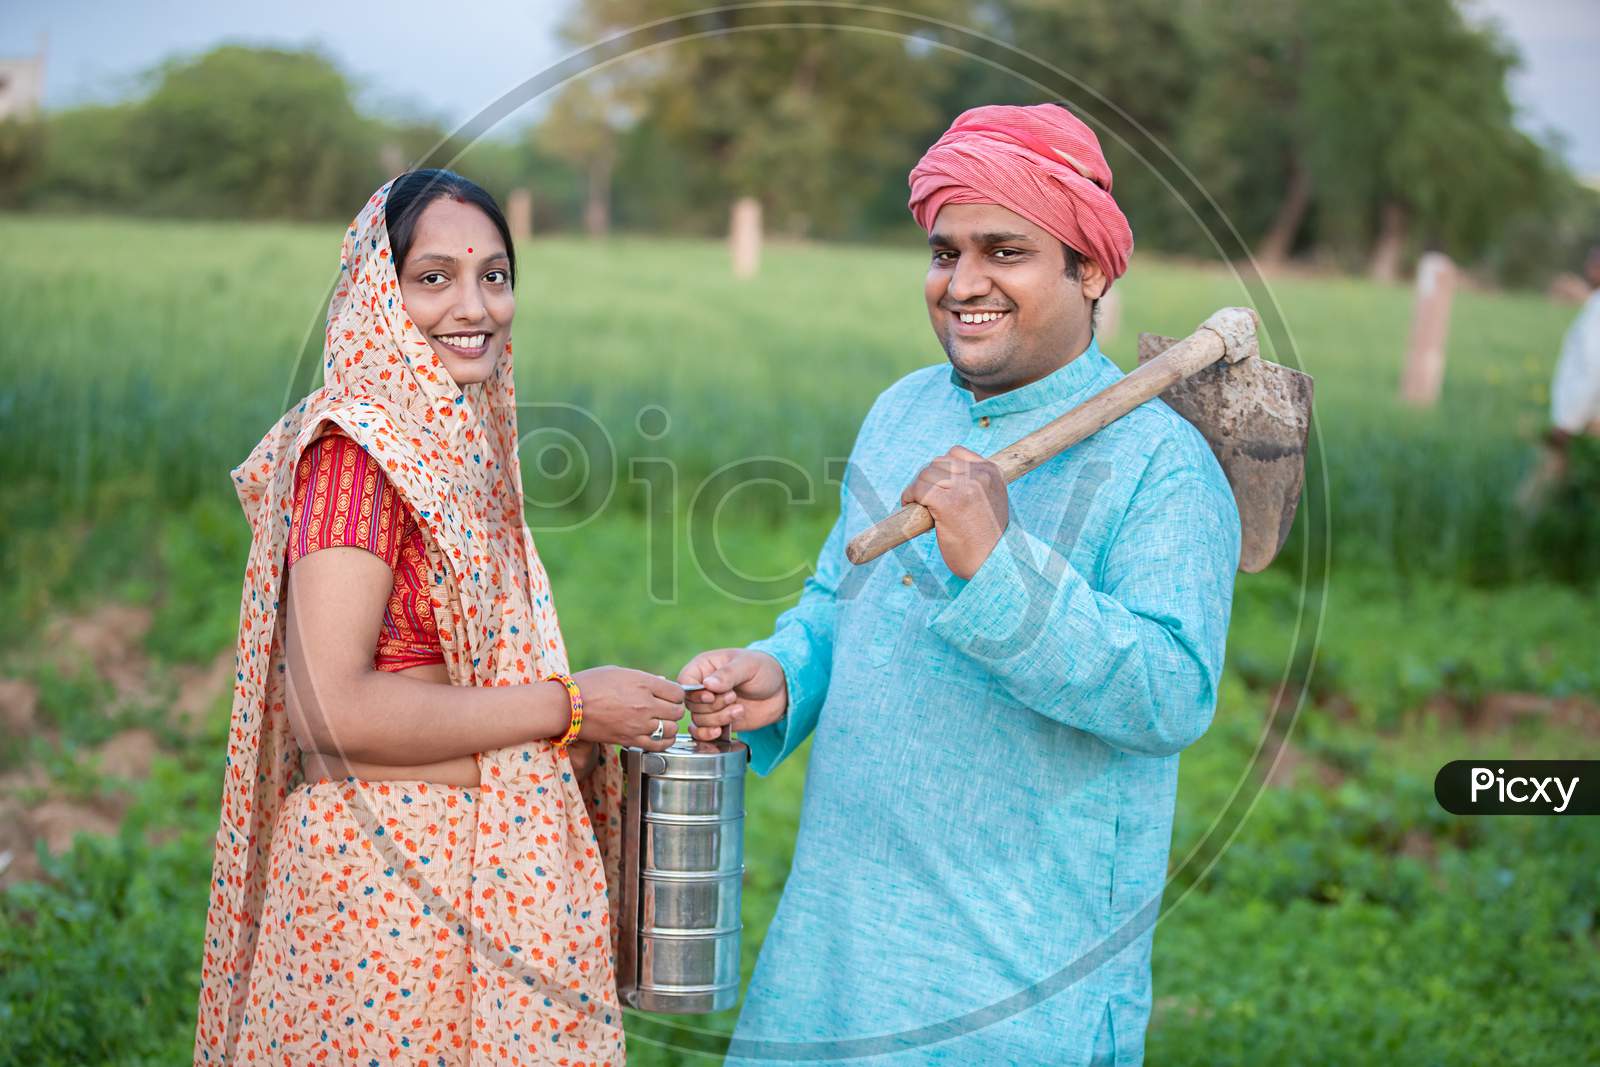 Portrait Of Traditional Indian Farmer Couple Or Labor Worker In Agriculture Field Holding Tiffing Lunch Box And Pretail Garden Spade / Shovel Tool.